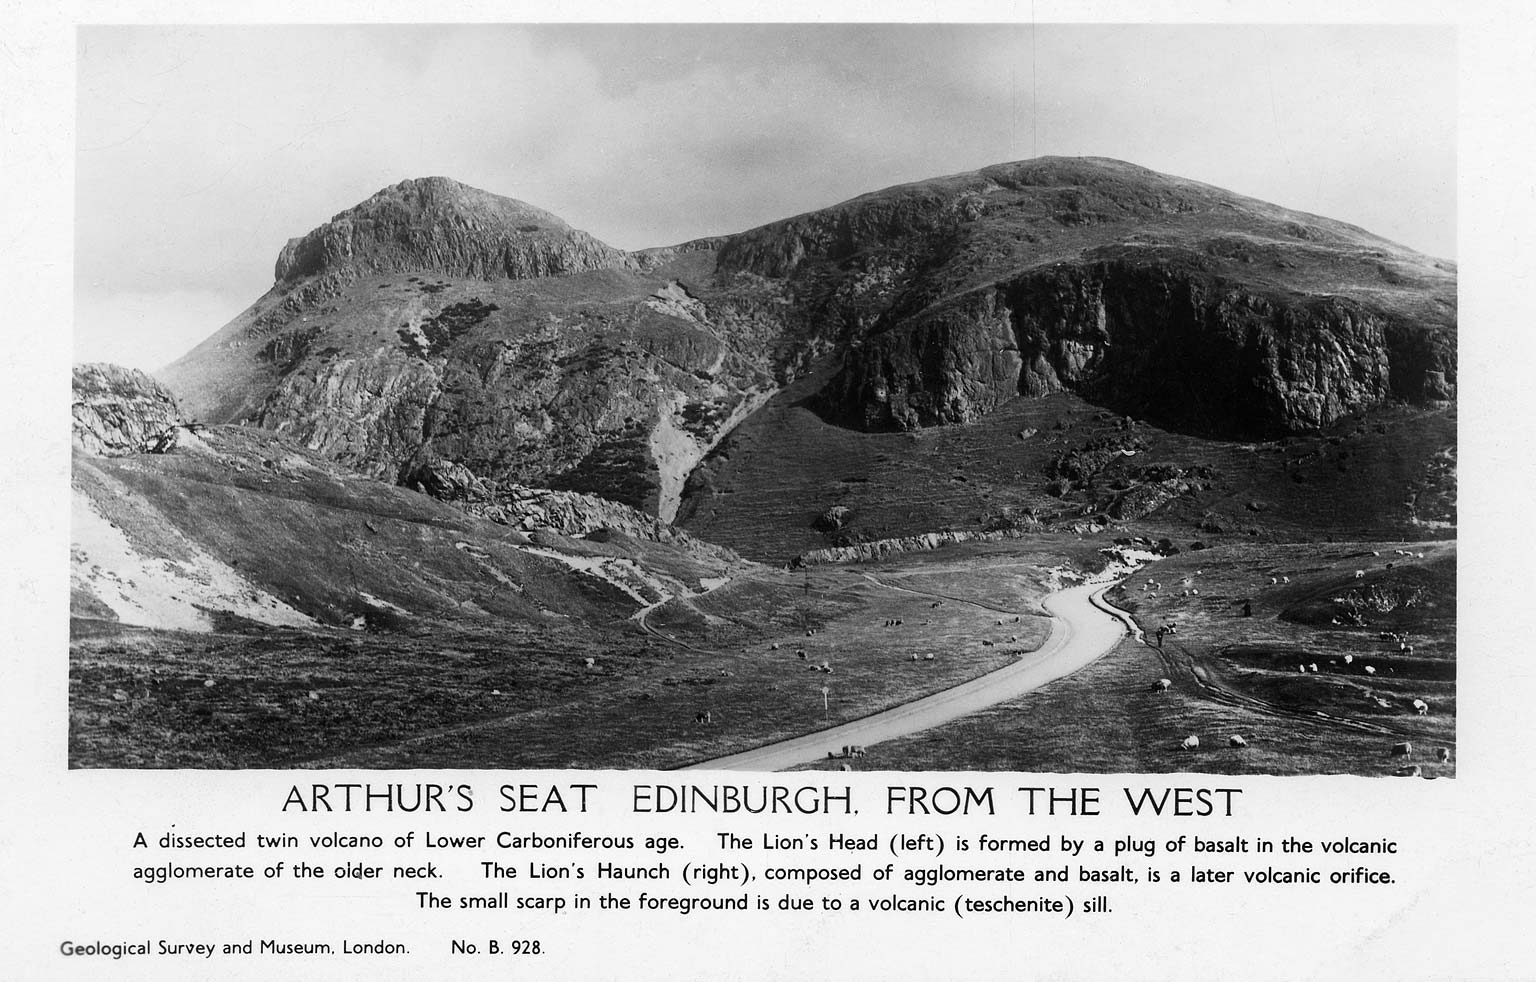 Postcard published by Geological Survey and Museum, London  -  Arthur's Seat, Edinburgh, from the West